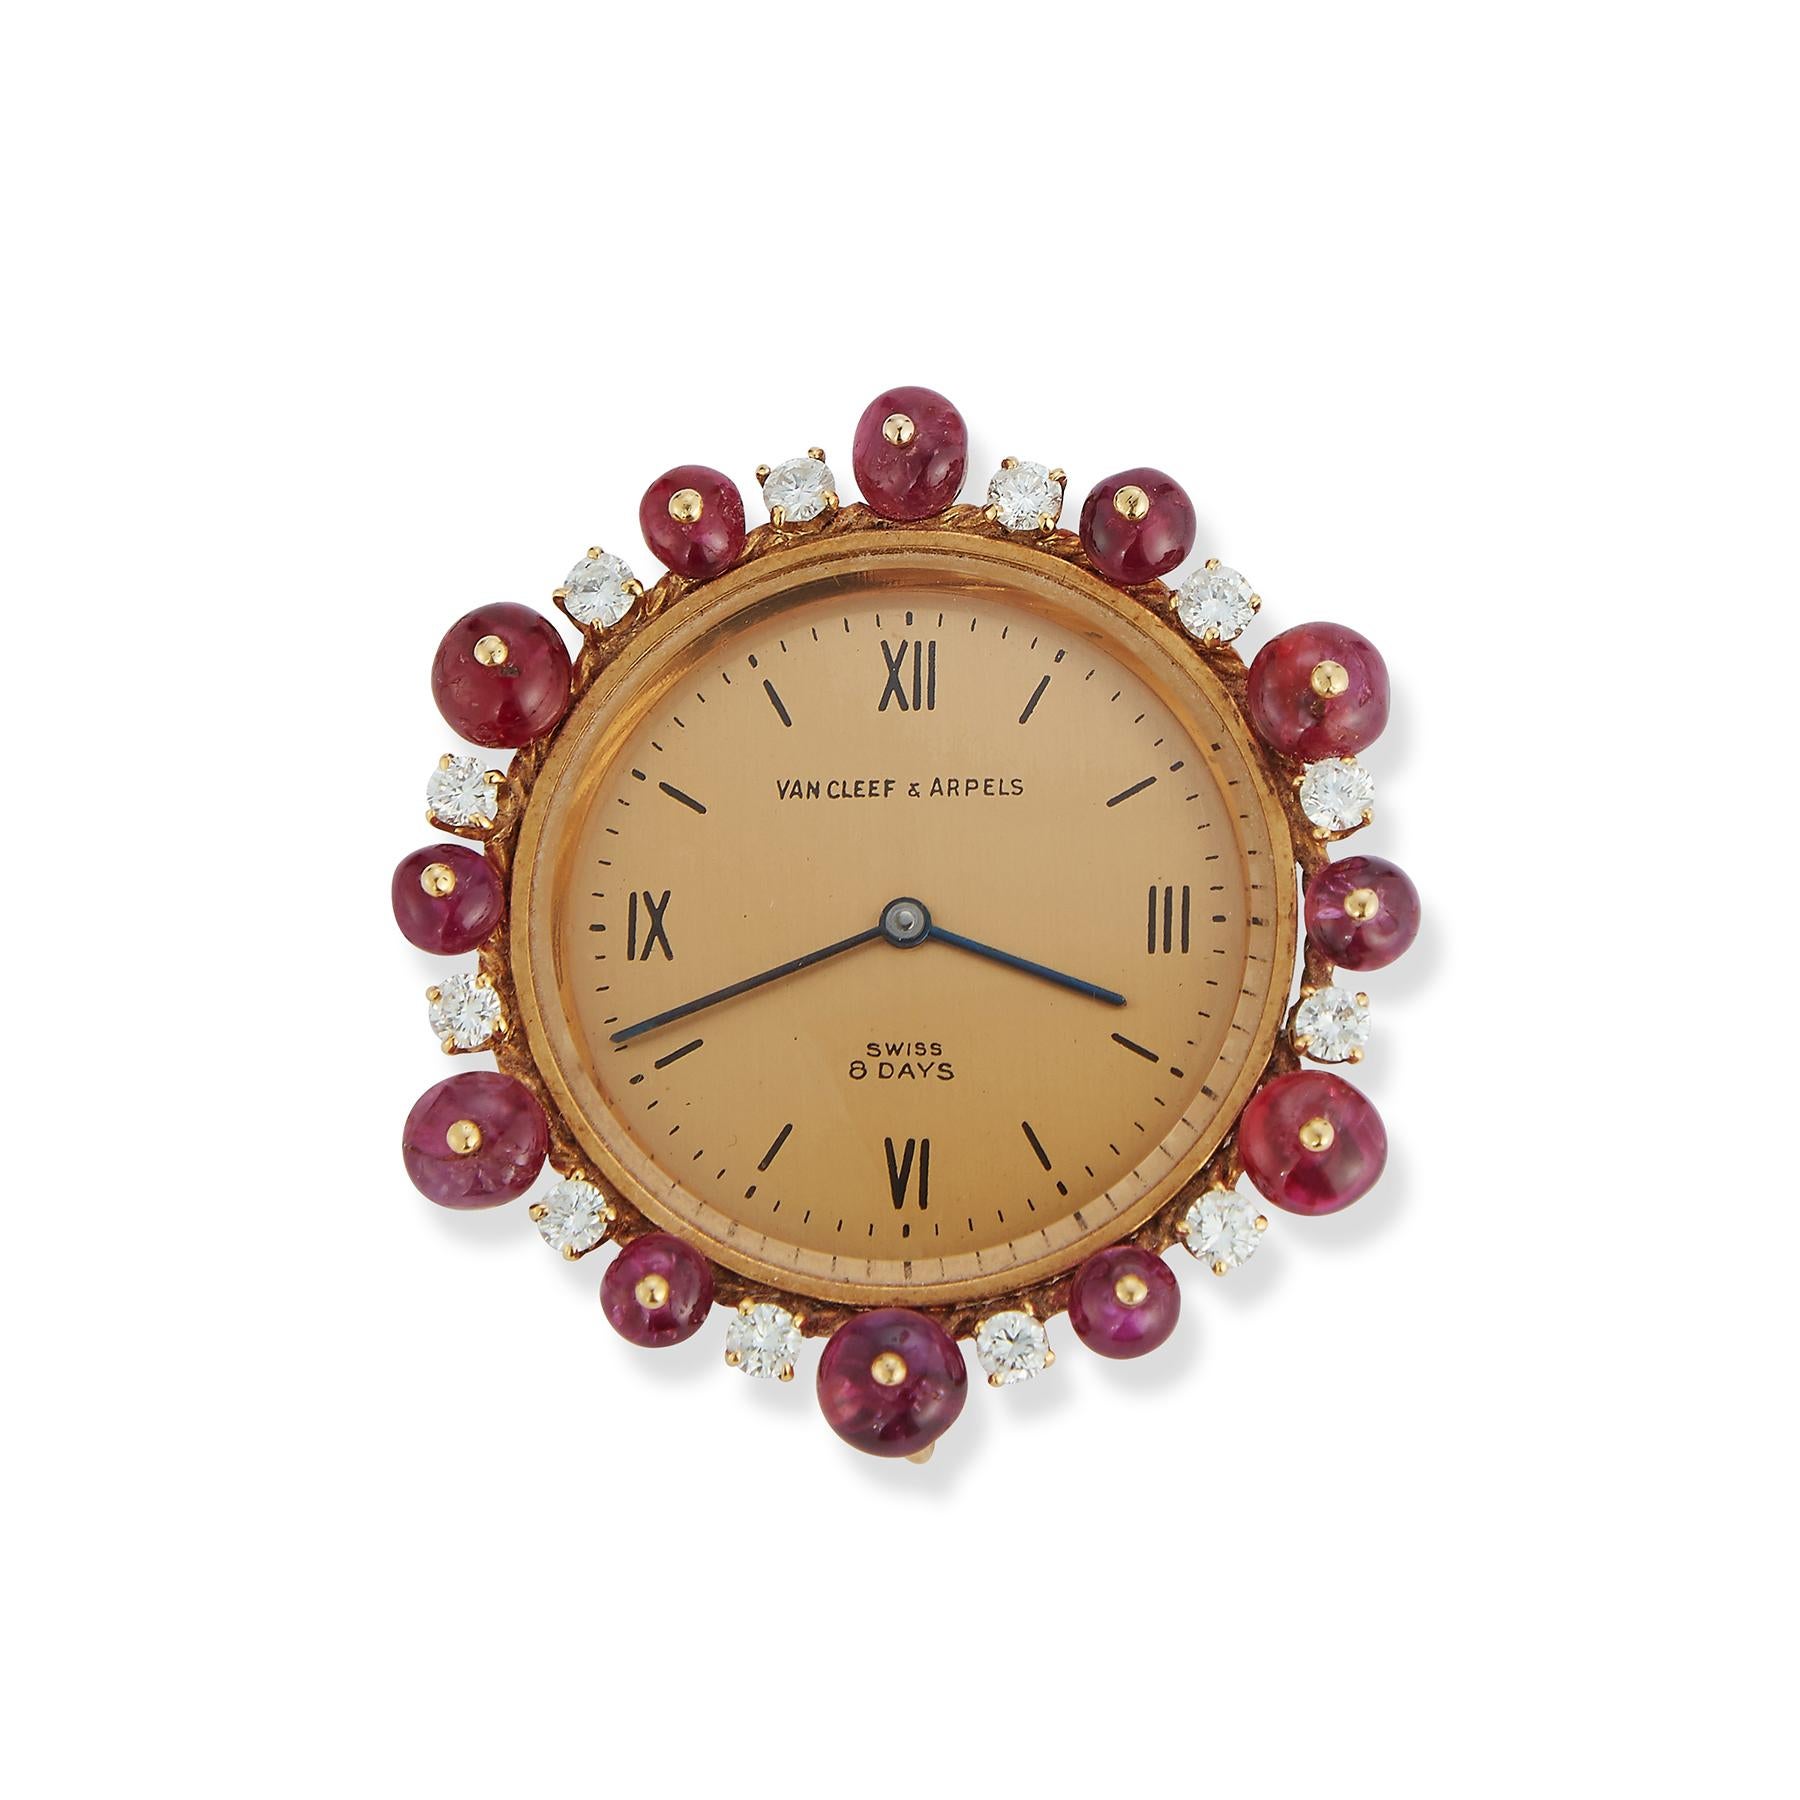 Van Cleef & Arpels Ruby Watch Pendant

Features 12 cabochon Rubies and diamonds surrounding the clock.

Dimensions: approximately 1.5 x 1.5 inches